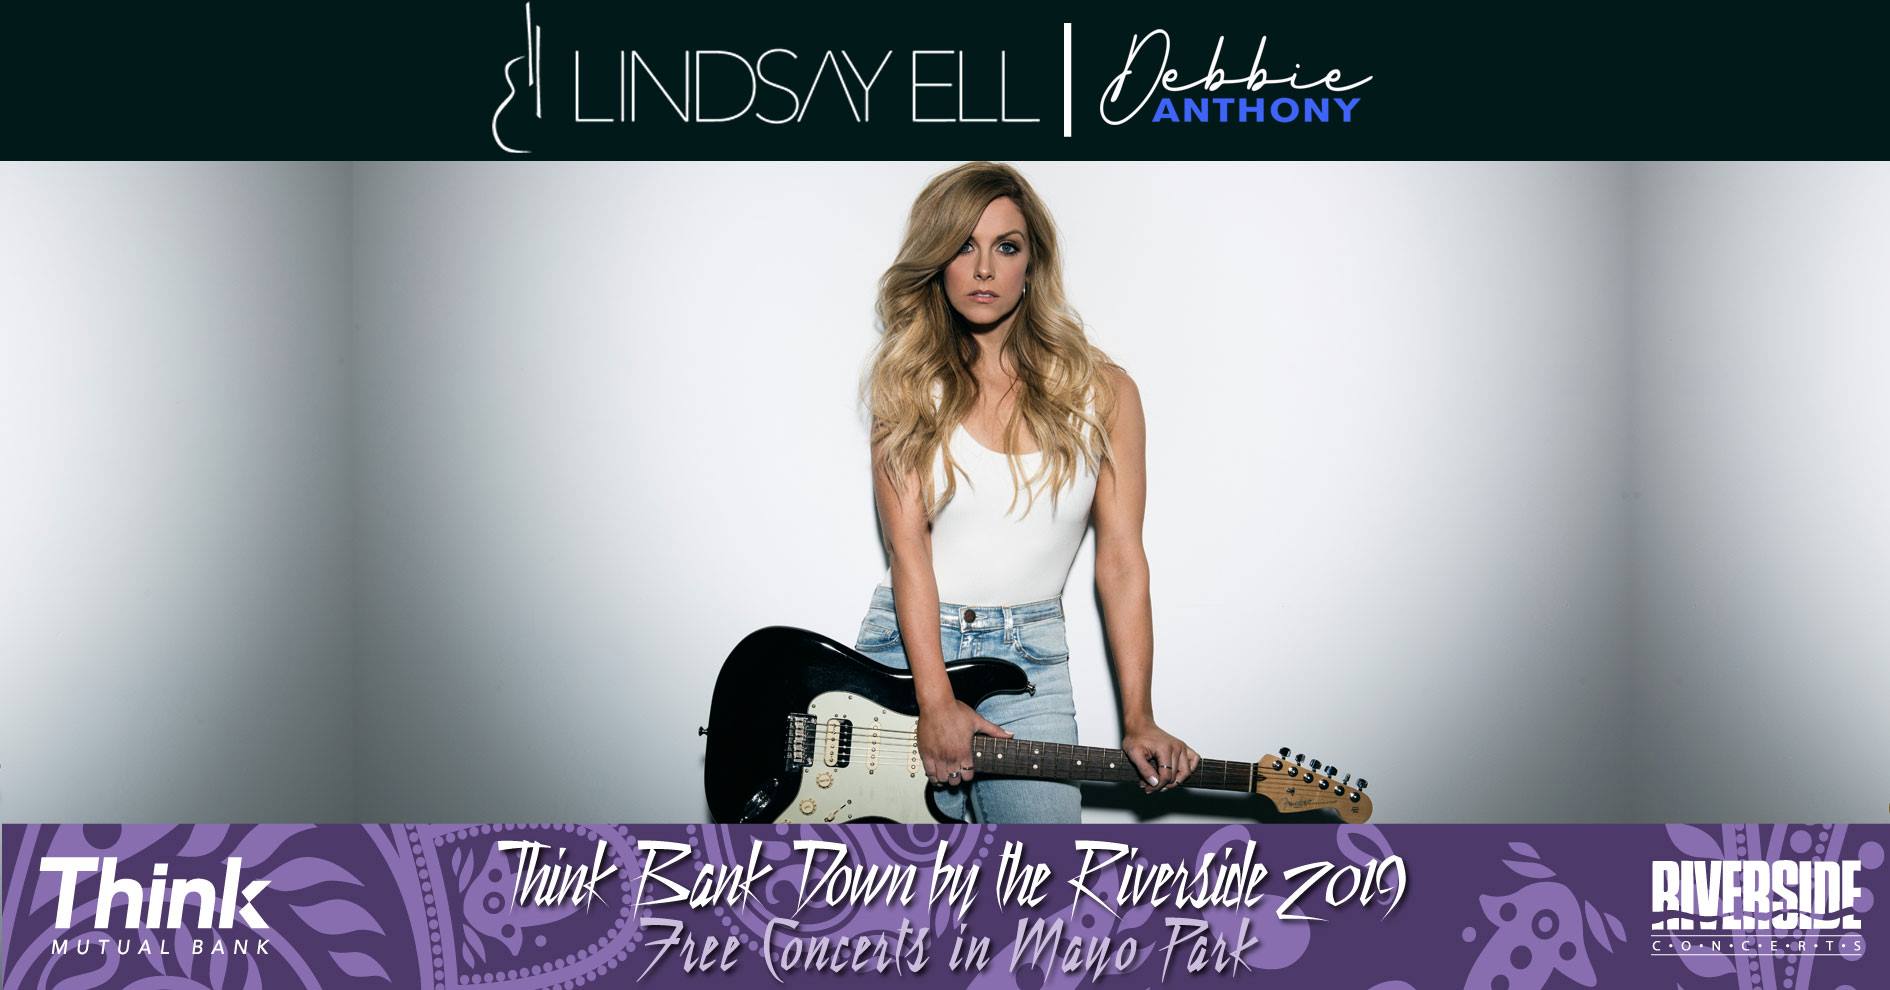 Lindsay Ell w: Debbie Anthony in Rochester, MN